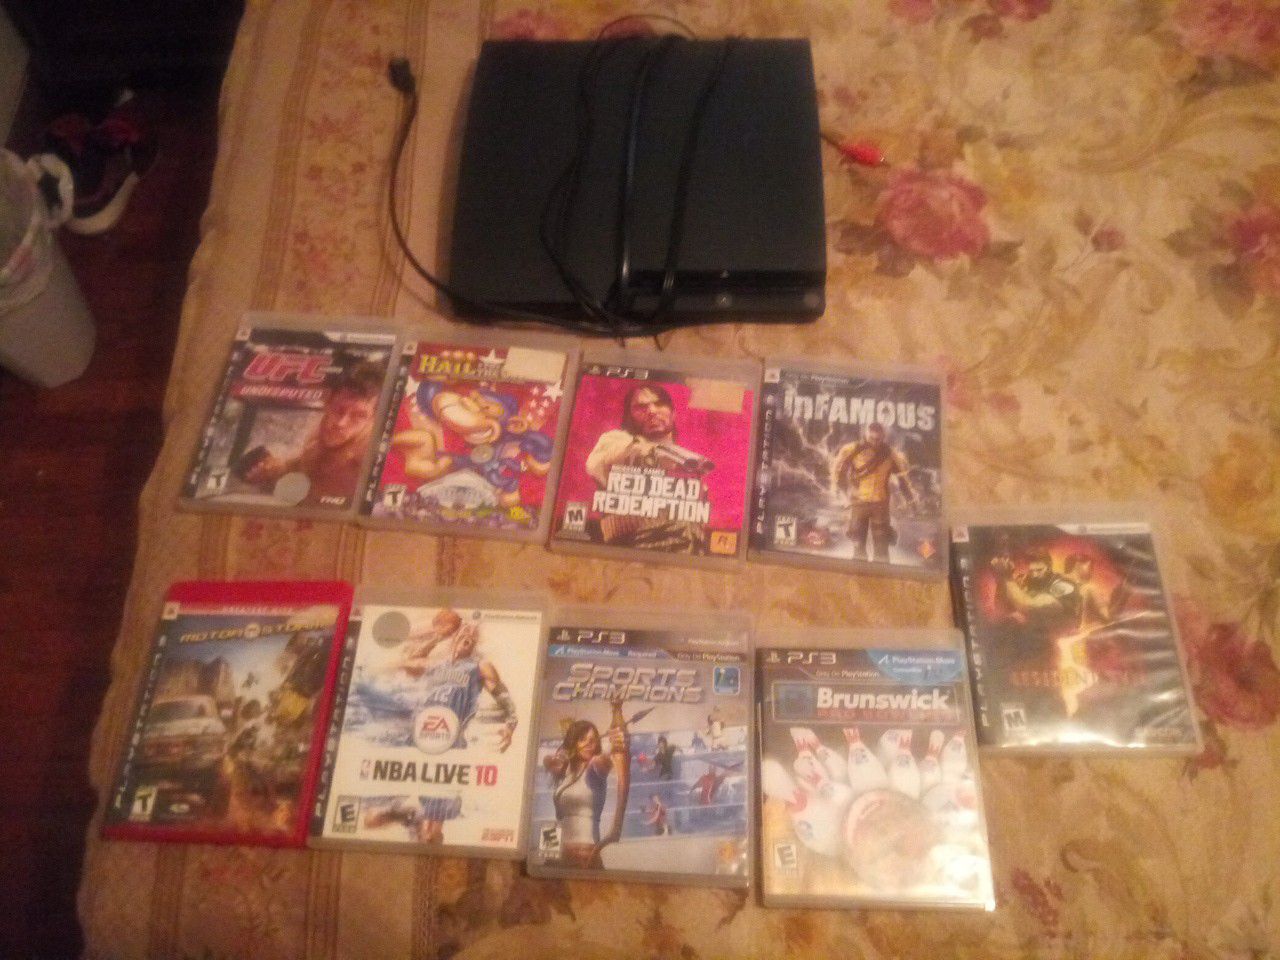 12:00 a.m. specialPlaystation 3 and 9 games